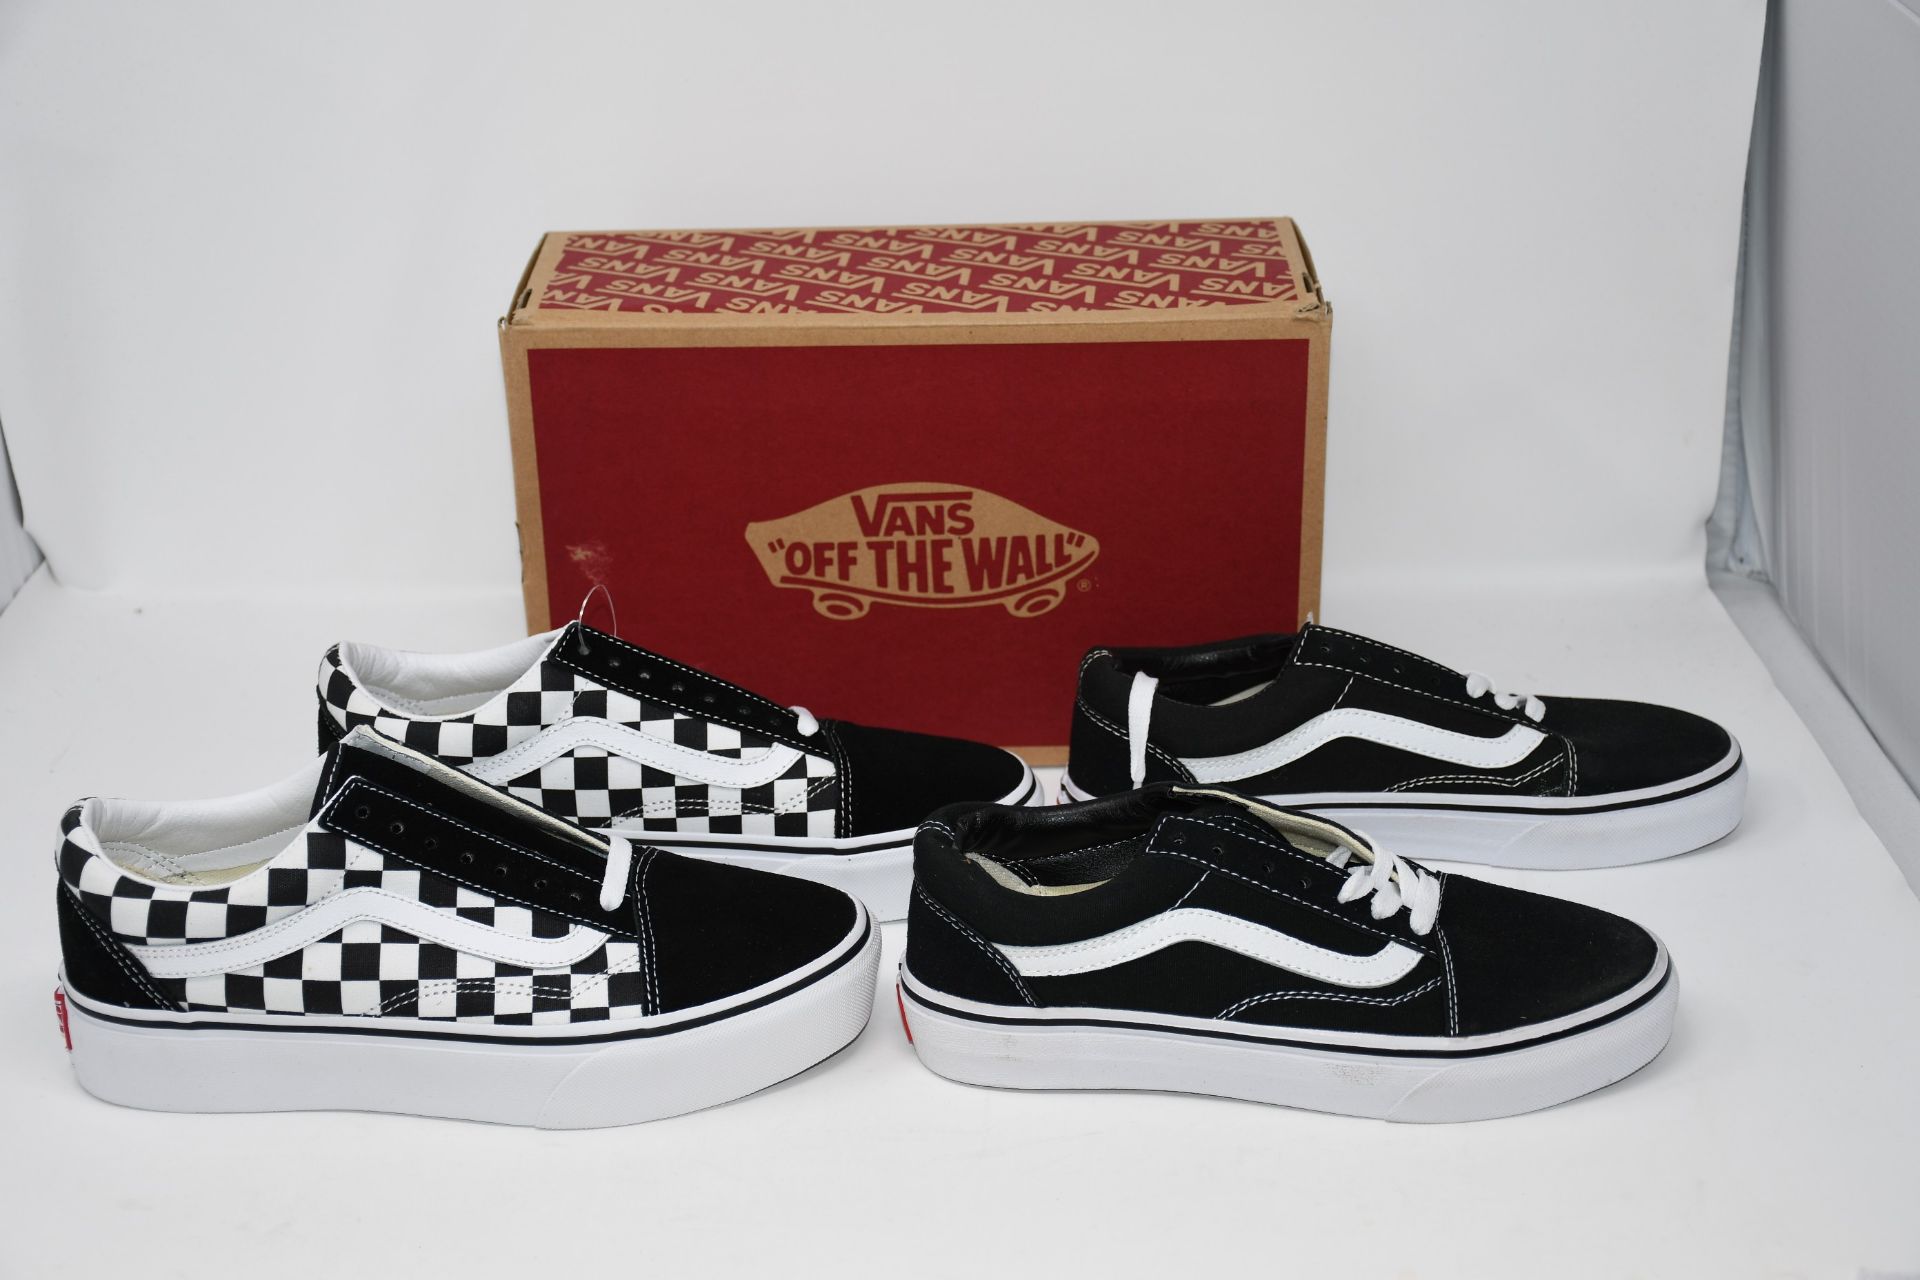 One as new Vans Old School Checkerboards size UK 5.5. One as new Vans Old School black/white size UK